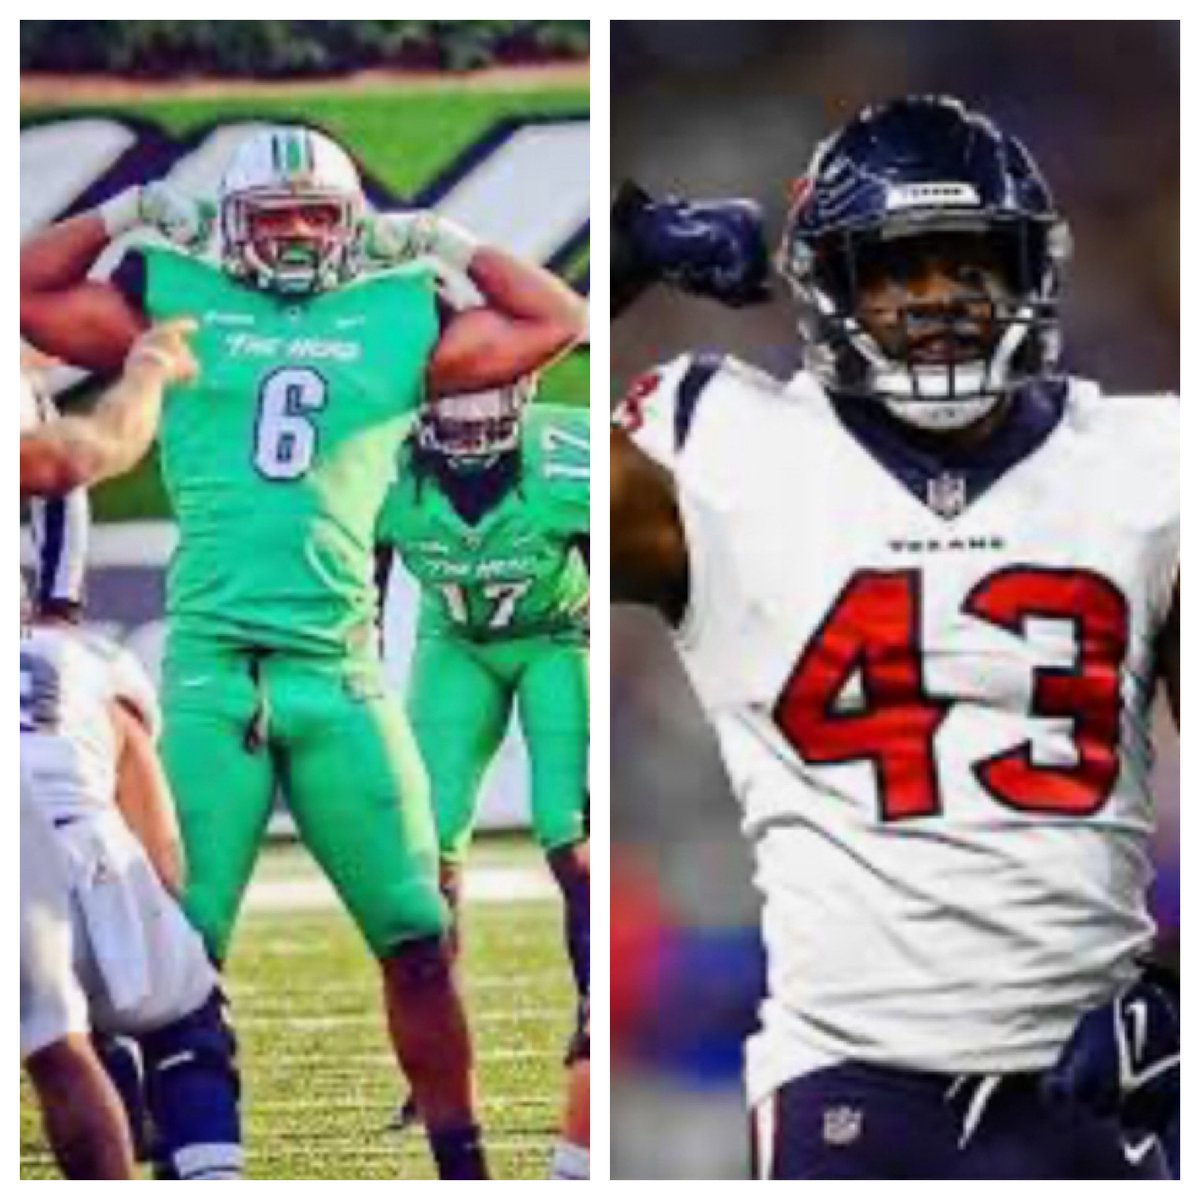 Wishing @HerdFB alum @Neville_Hewitt and @HoustonTexans the very best of luck, as the @NFL playoffs begin this weekend. #HerdFamily #OneHerd #HerdBrotherhood